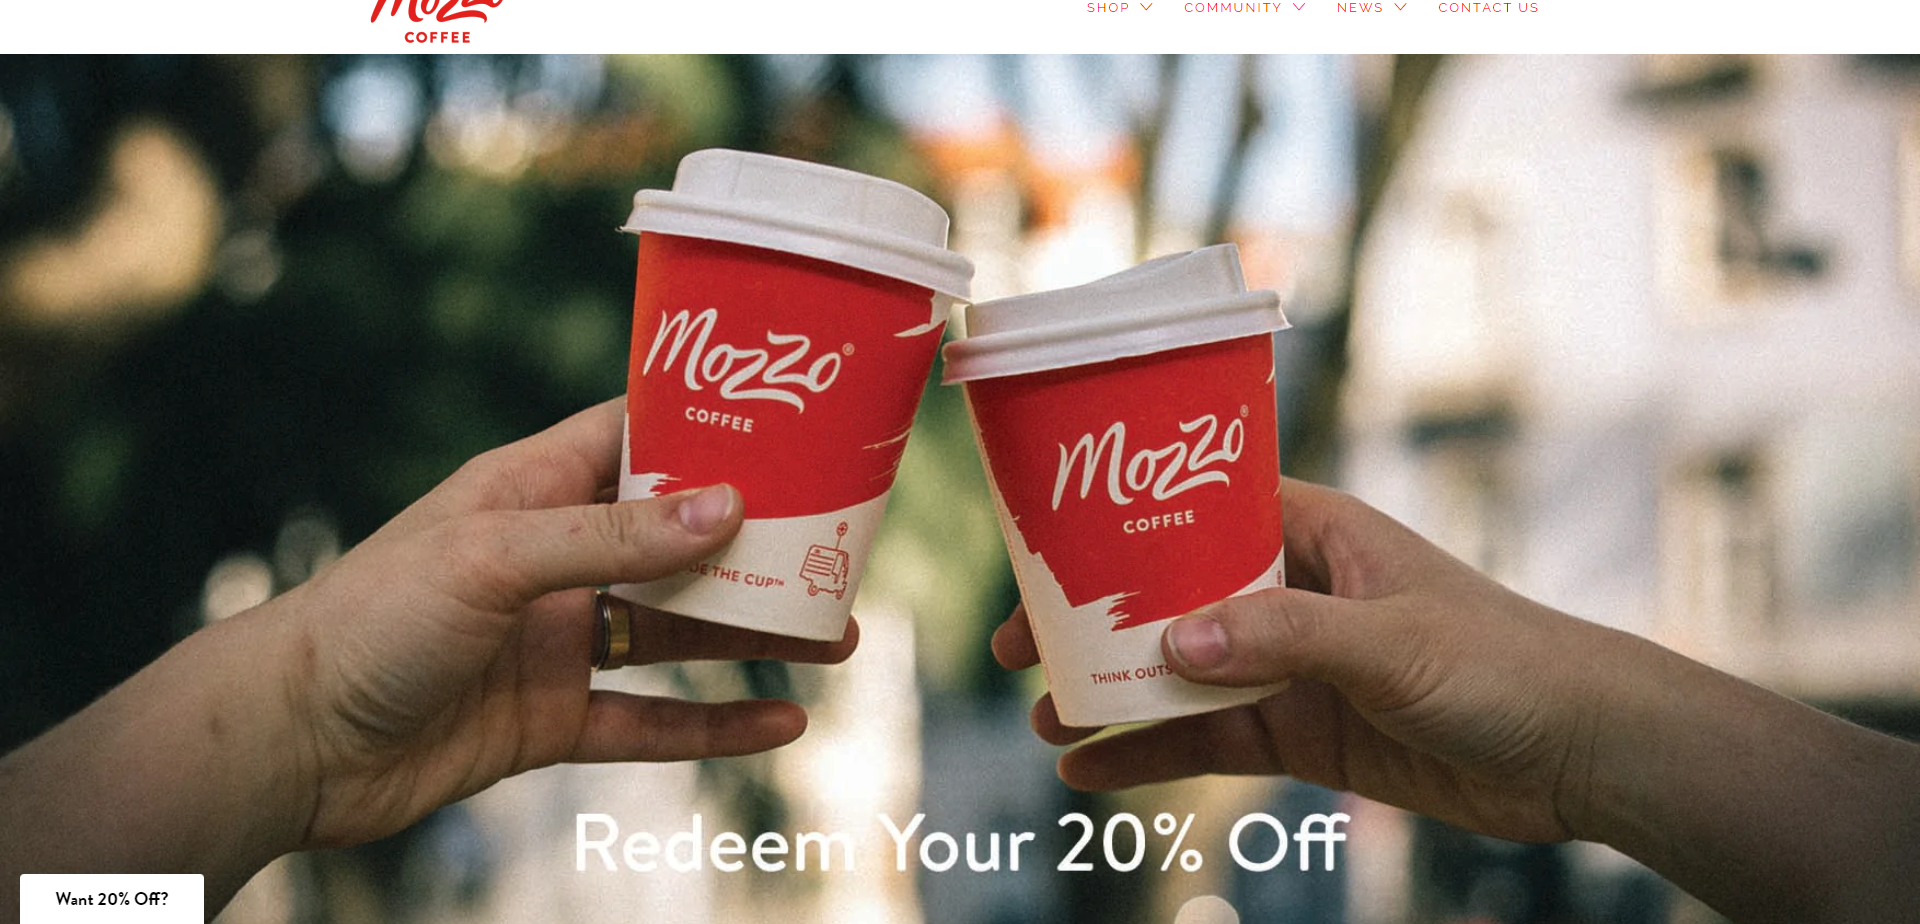 Referral Landing Page for Mozzo Coffee